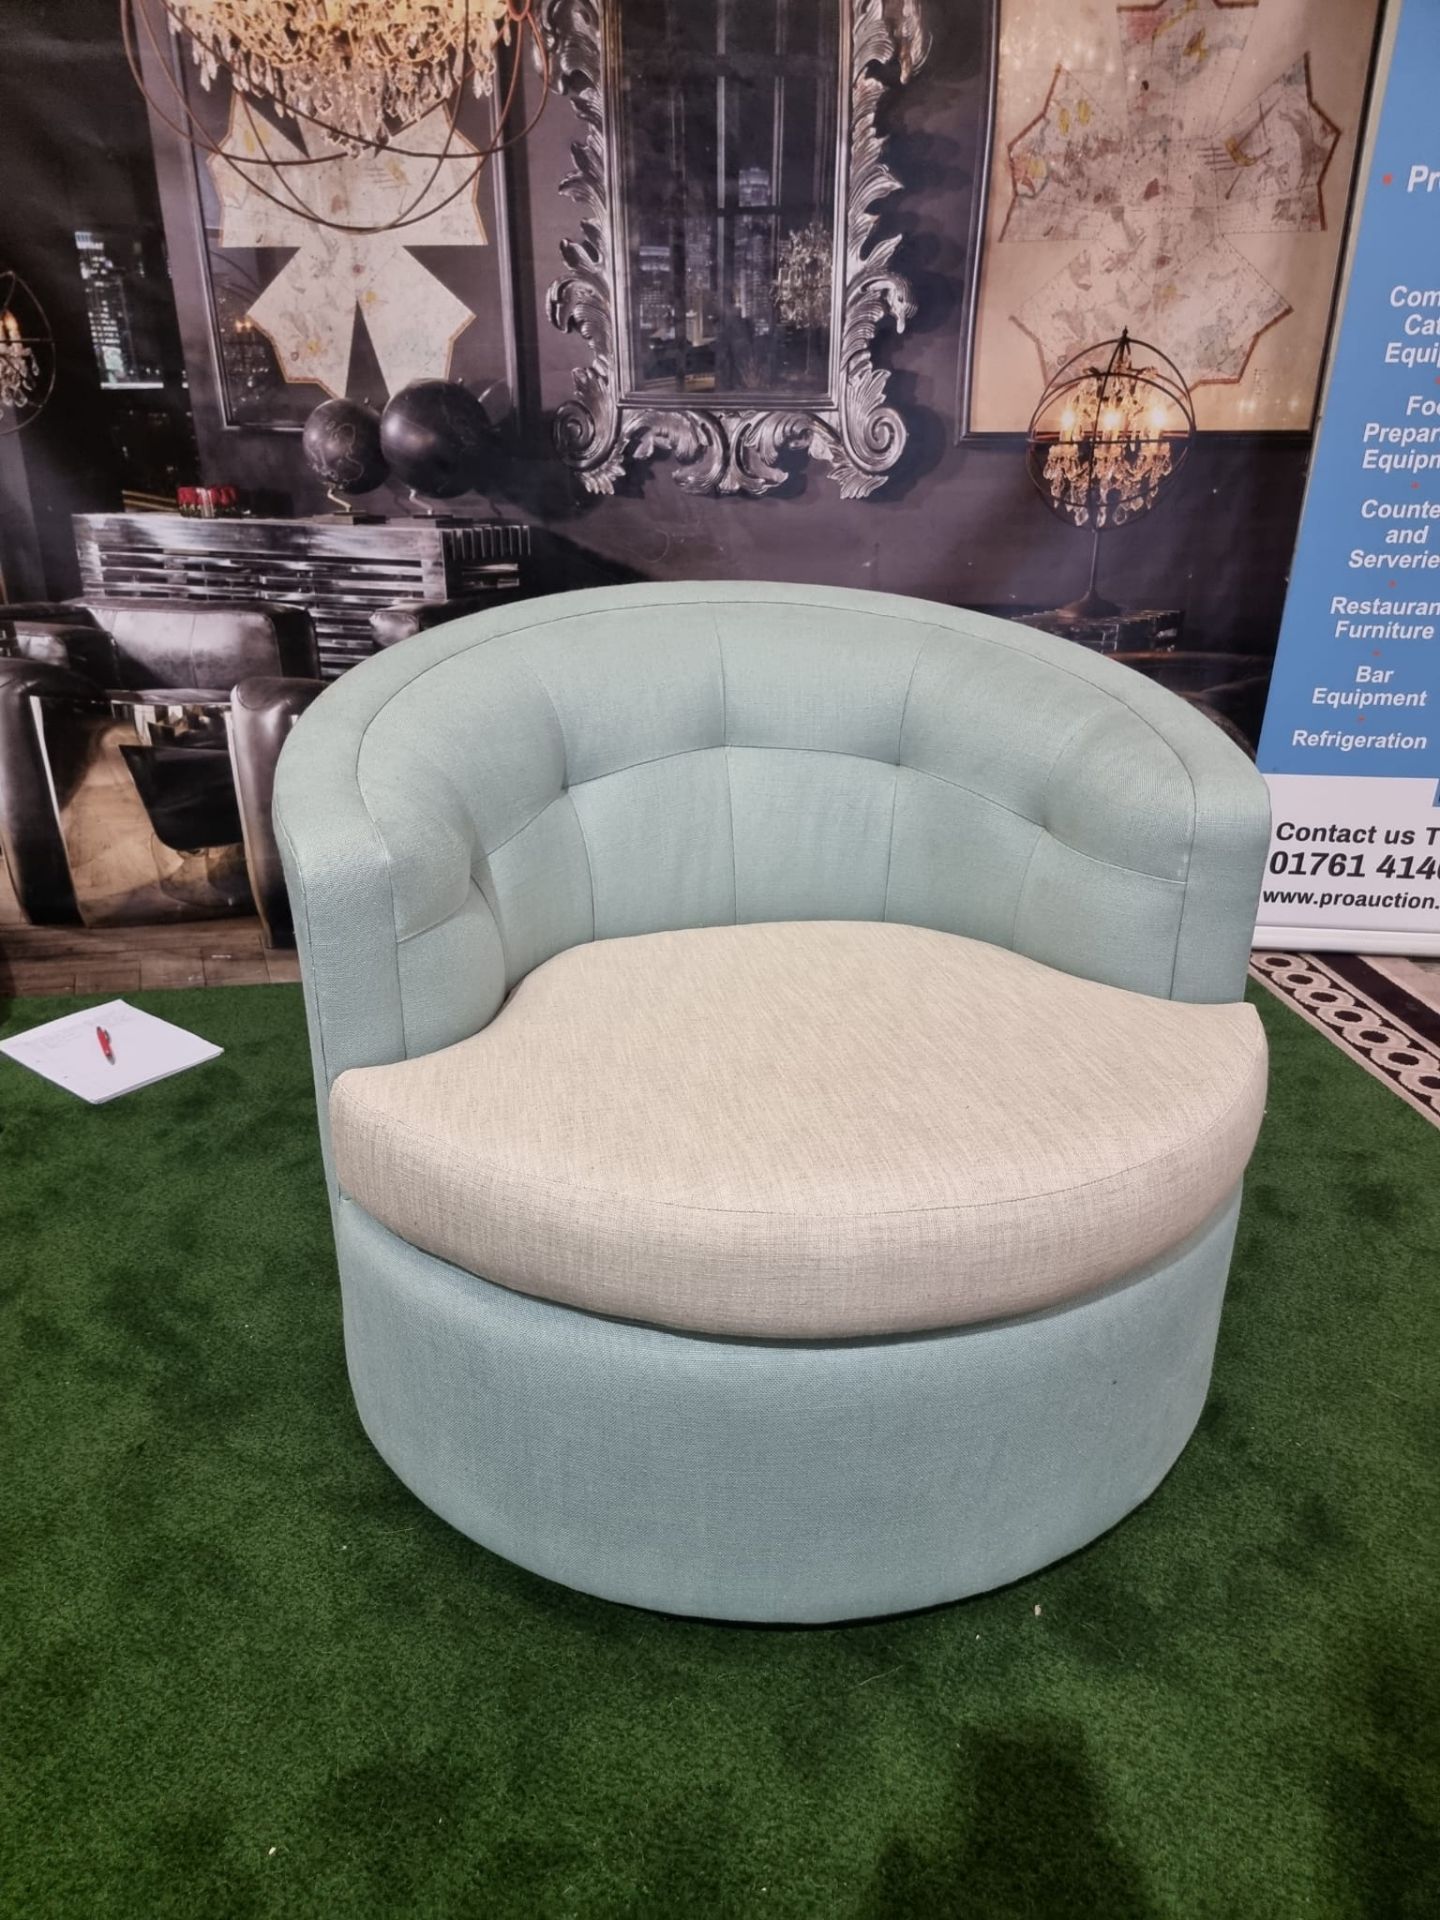 Mayfair Swivel Armchair This Swivel Armchair Makes A Real Statement And Adds A Contemporary Accent - Bild 4 aus 7